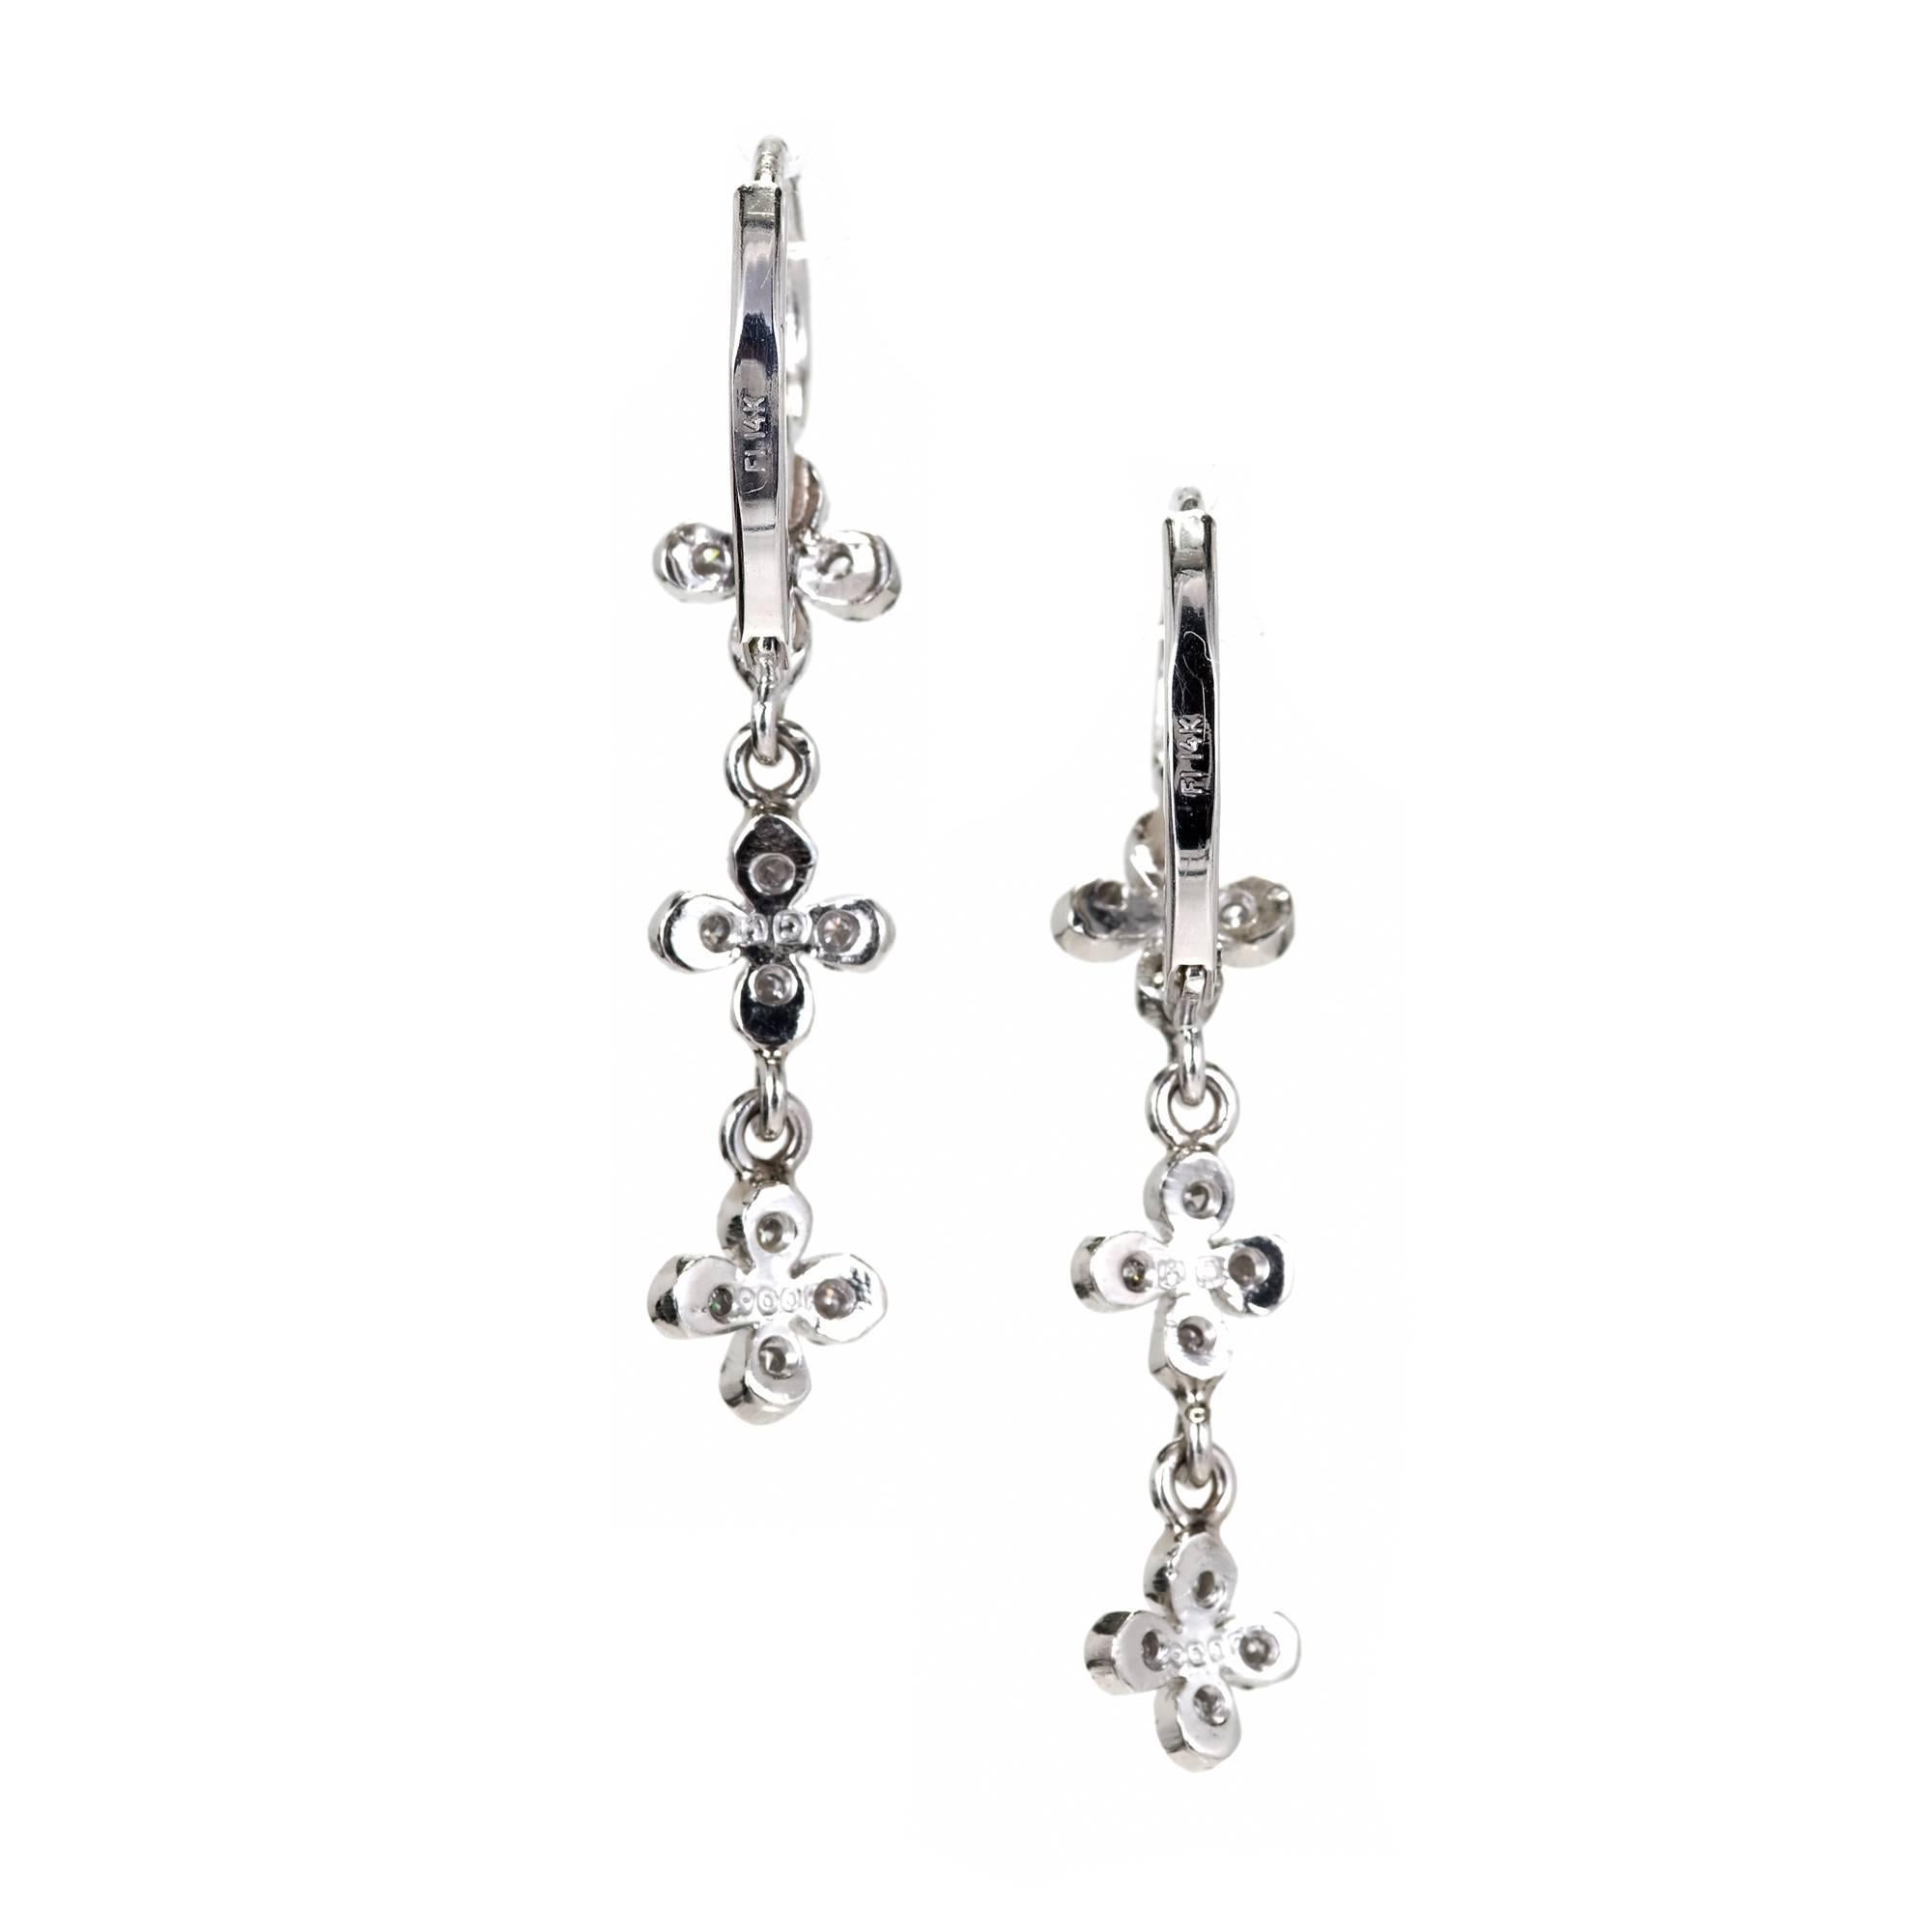 Cathy Waterman diamond triple four petal earrings. 14k white gold lever back earrings. Platinum four petal dangles.

24 full cut round diamonds, approx. total weight .15cts, F-G, VS
14k white gold and Platinum
3.8 grams
Stamped: 14k 900 P
Hallmark: